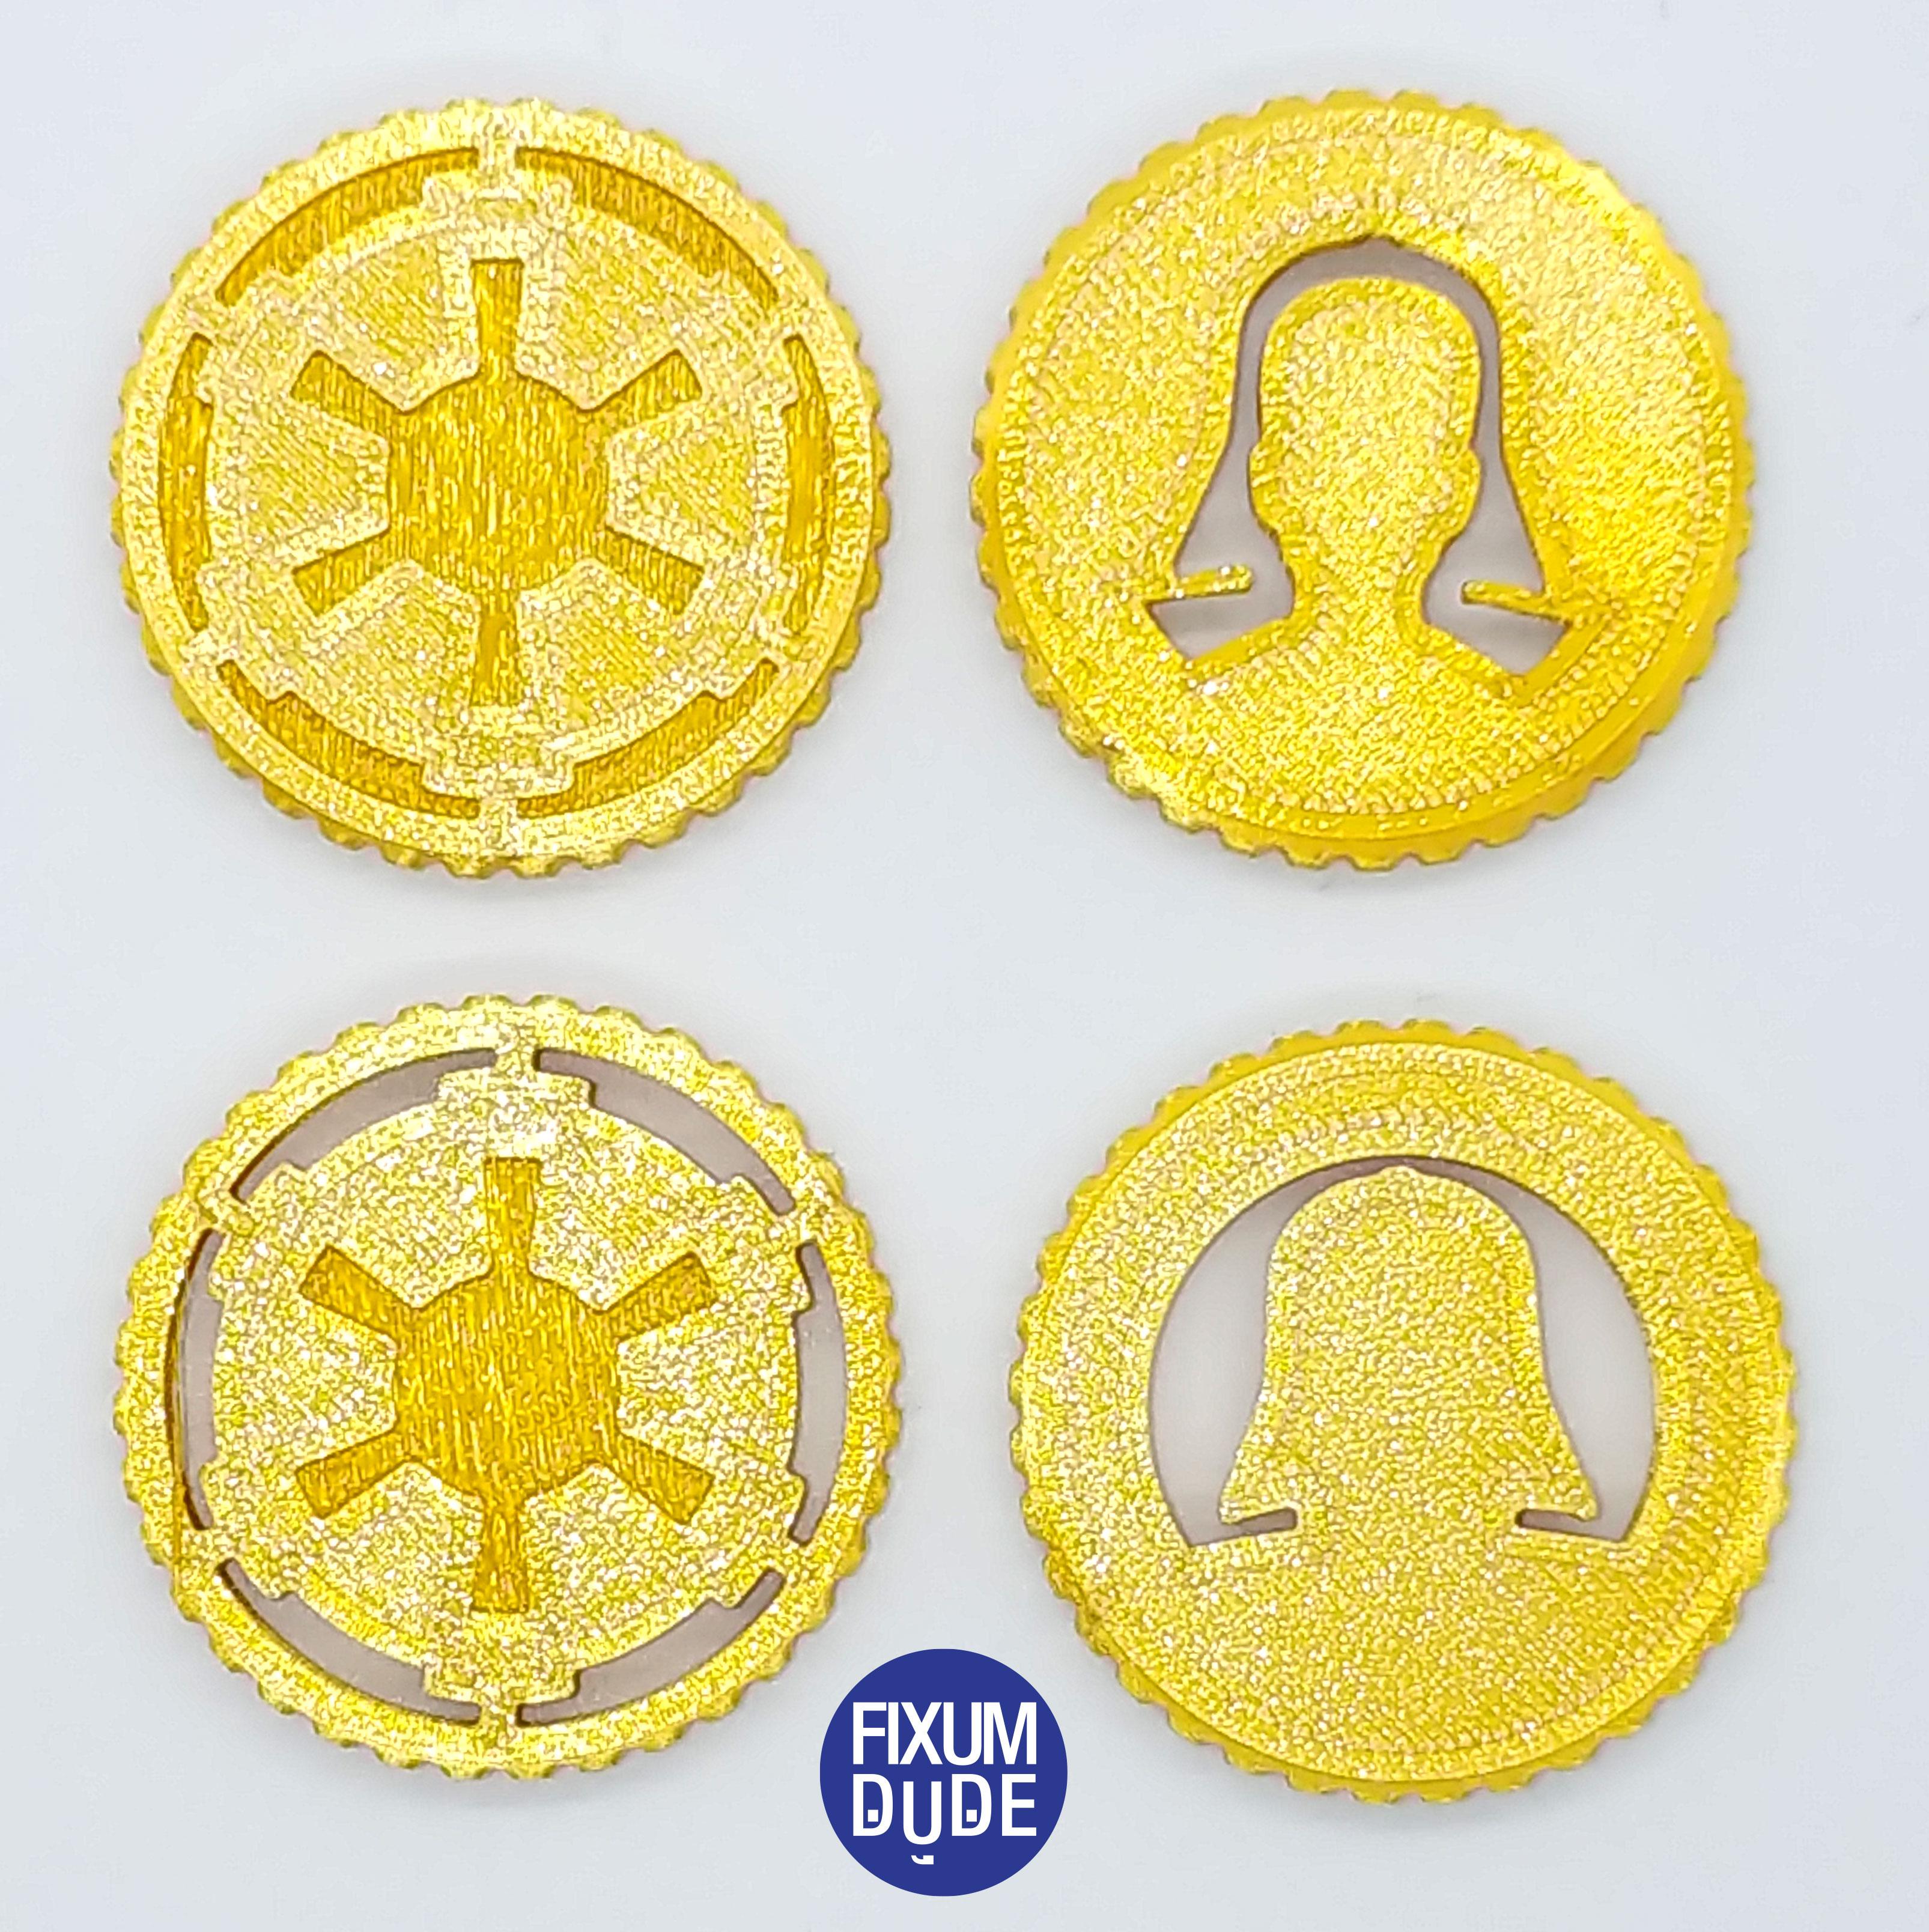 Chris Pirillo's Darth Vader Empire Star Wars Inspired Creator (Maker) Coin Collection - Coin Backs.  Printed at 0.1 mm Layer height in SUNLU Silk Light Gold PLA on the Ender 5 Plus - 3d model